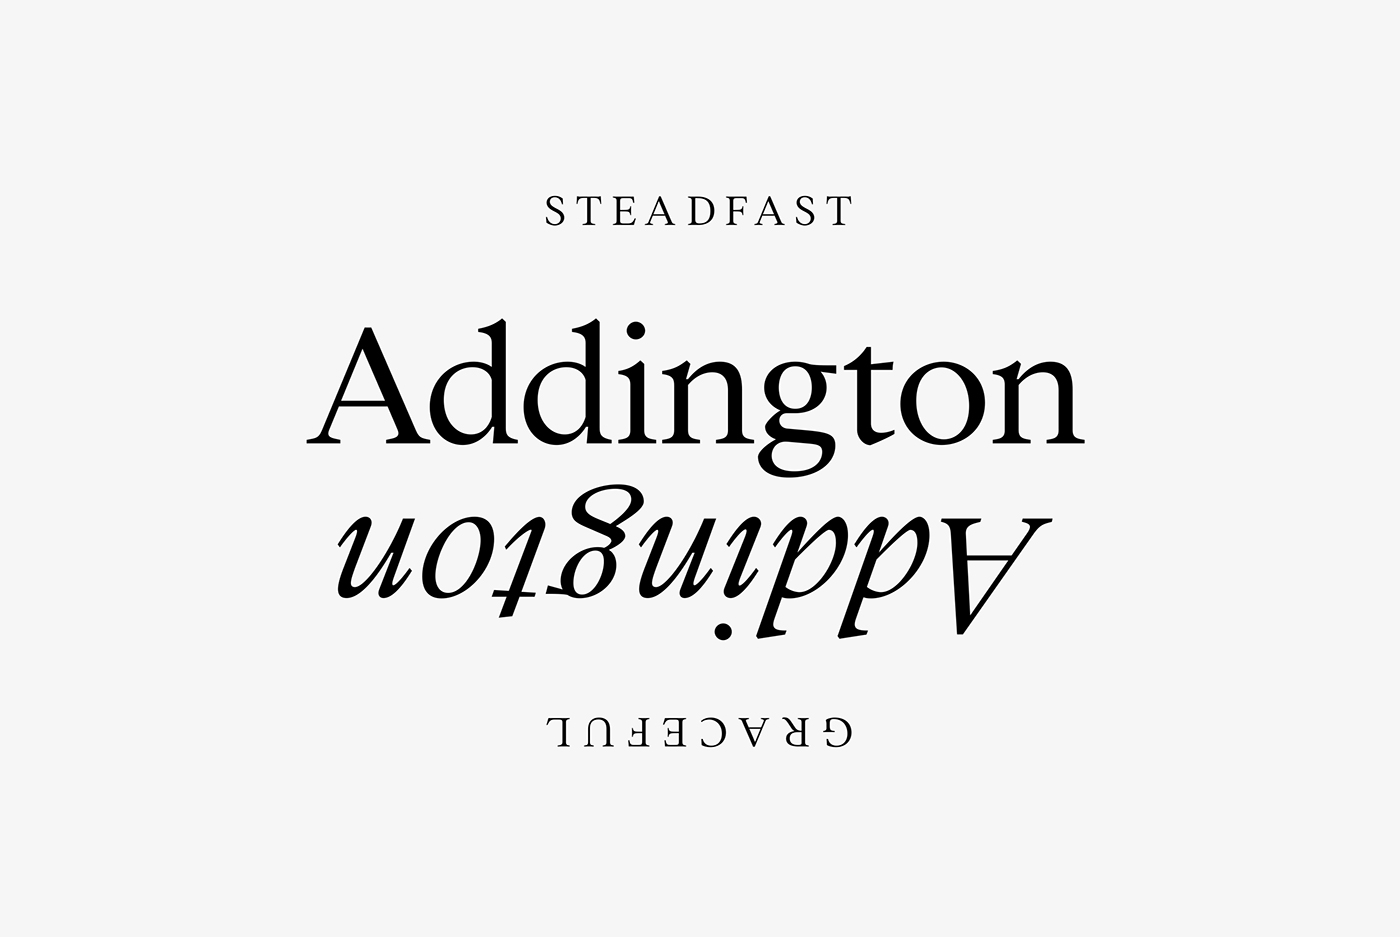 font Typeface serif traditional Classic connary fagen typography   font design type design fonts